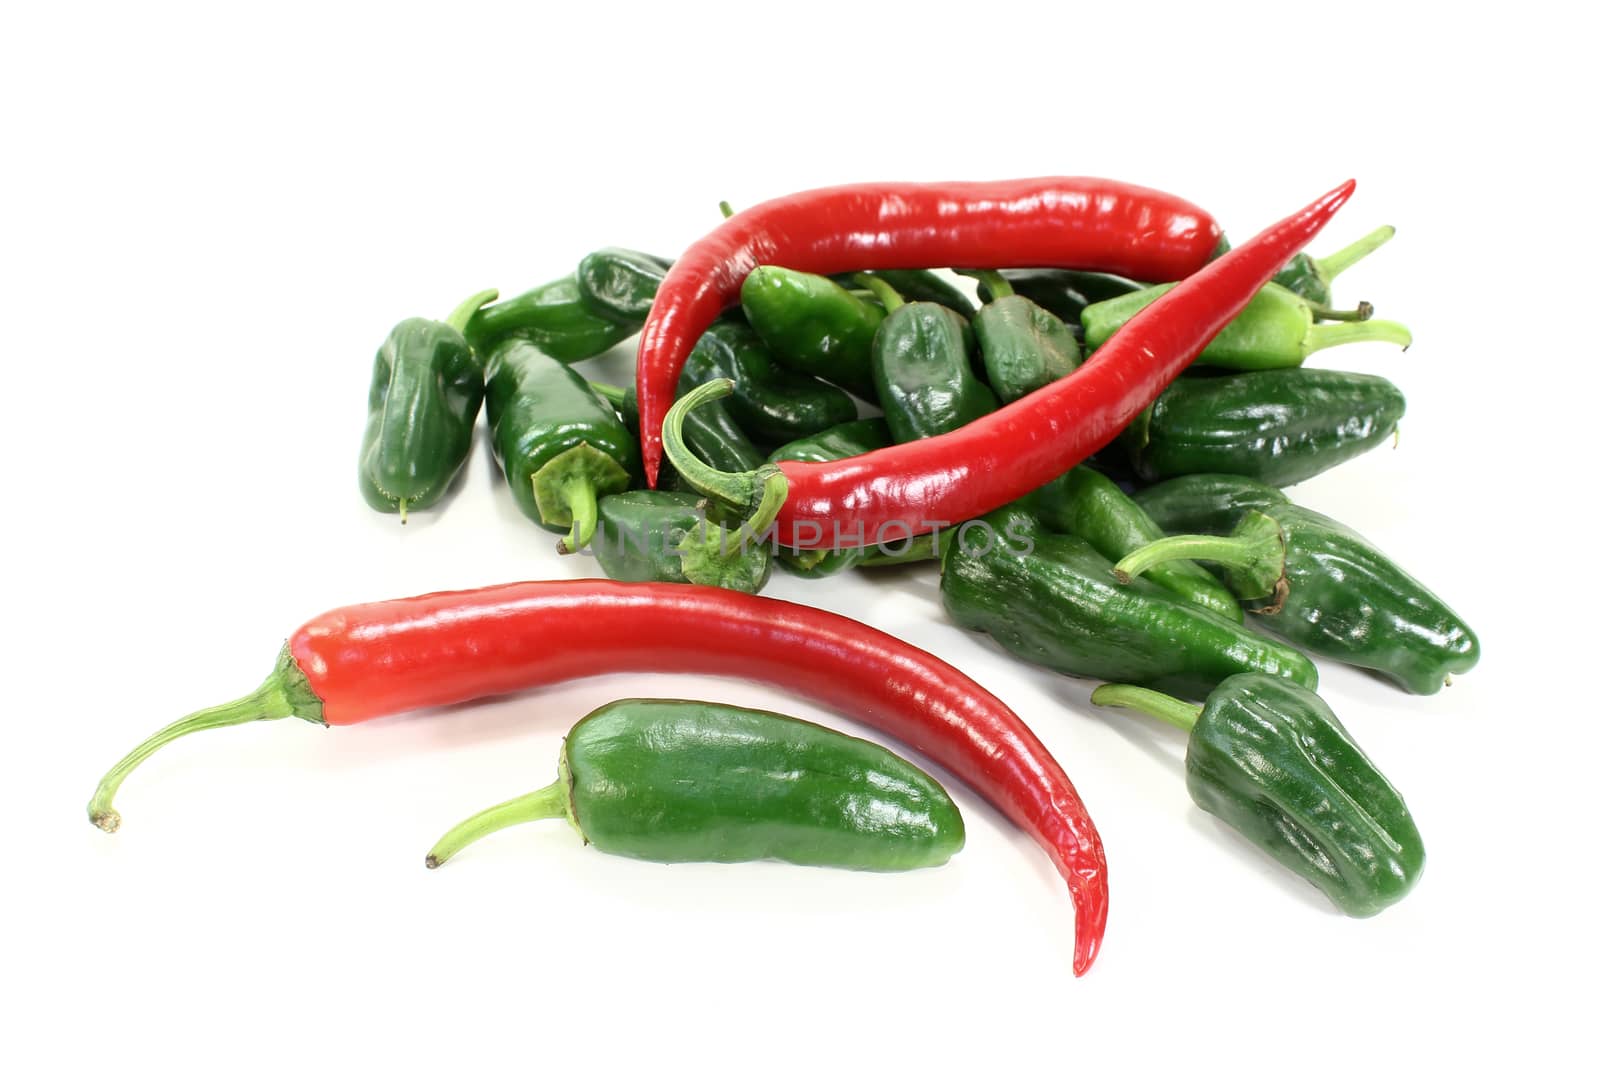 Pimientos with hot peppers on a light background